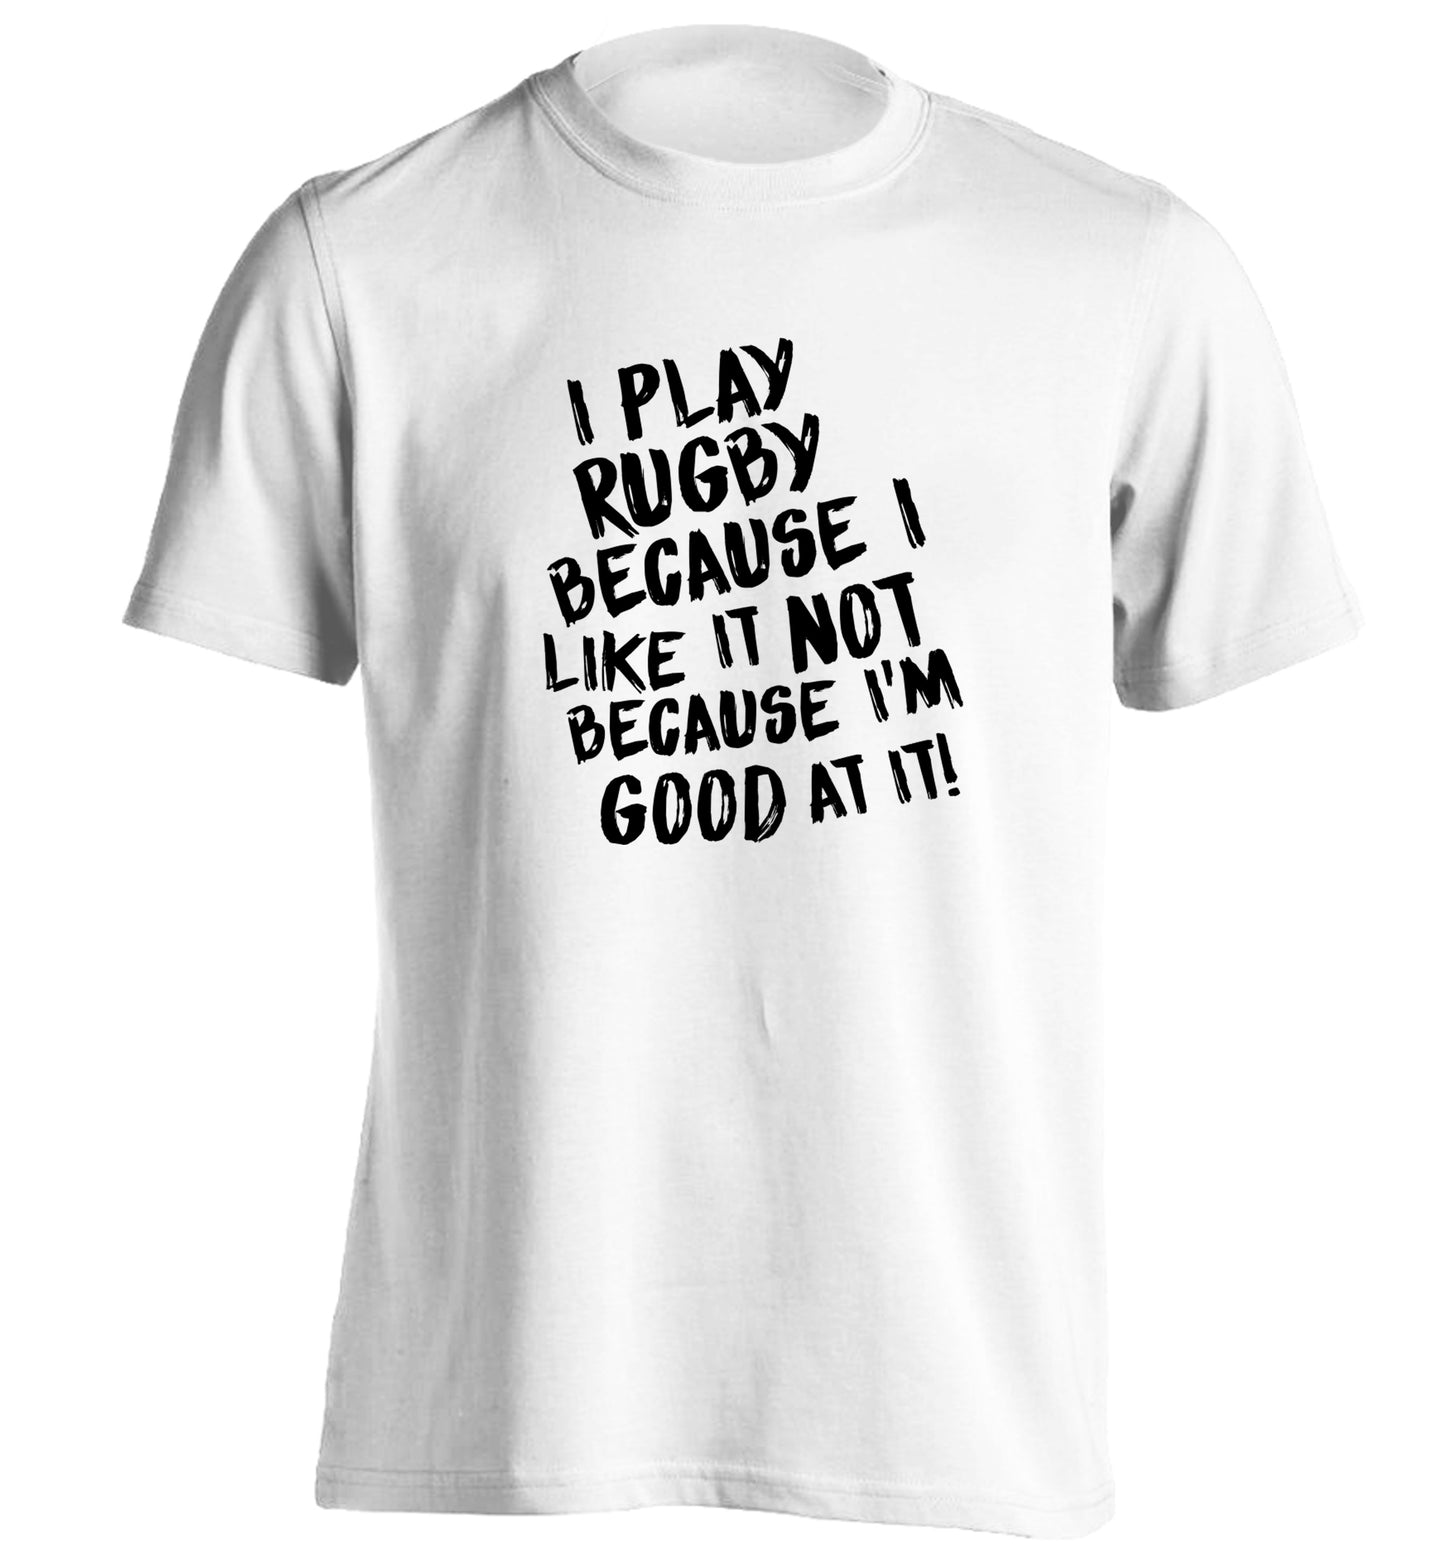 I play rugby because I like it not because I'm good at it adults unisex white Tshirt 2XL